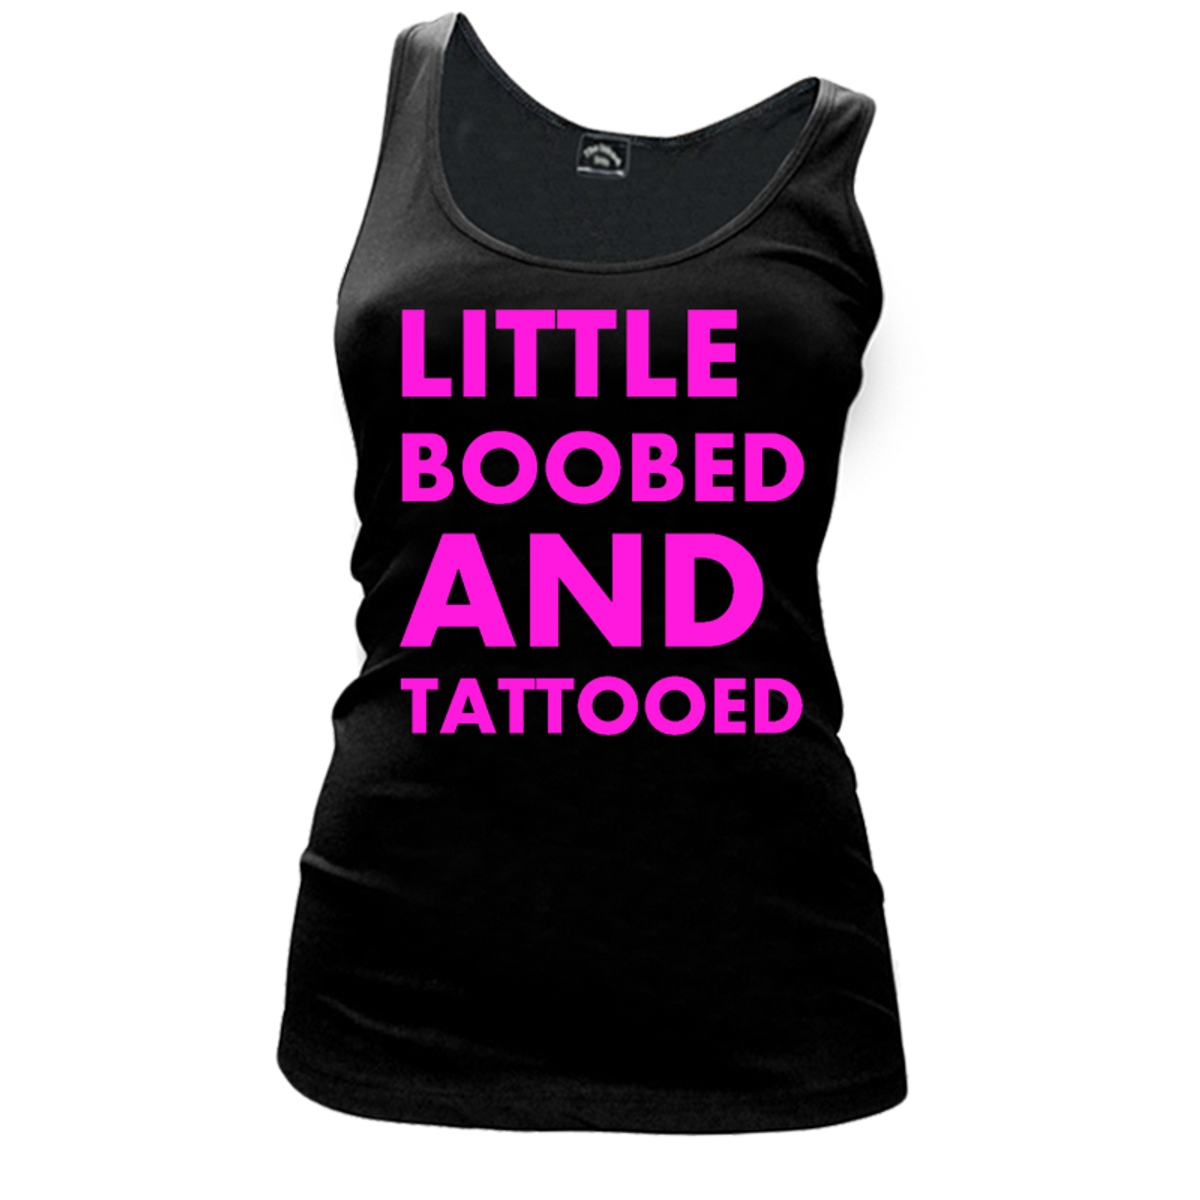 Women's Little Boobed And Tattooed - Tank Top - The Inked Boys Shop